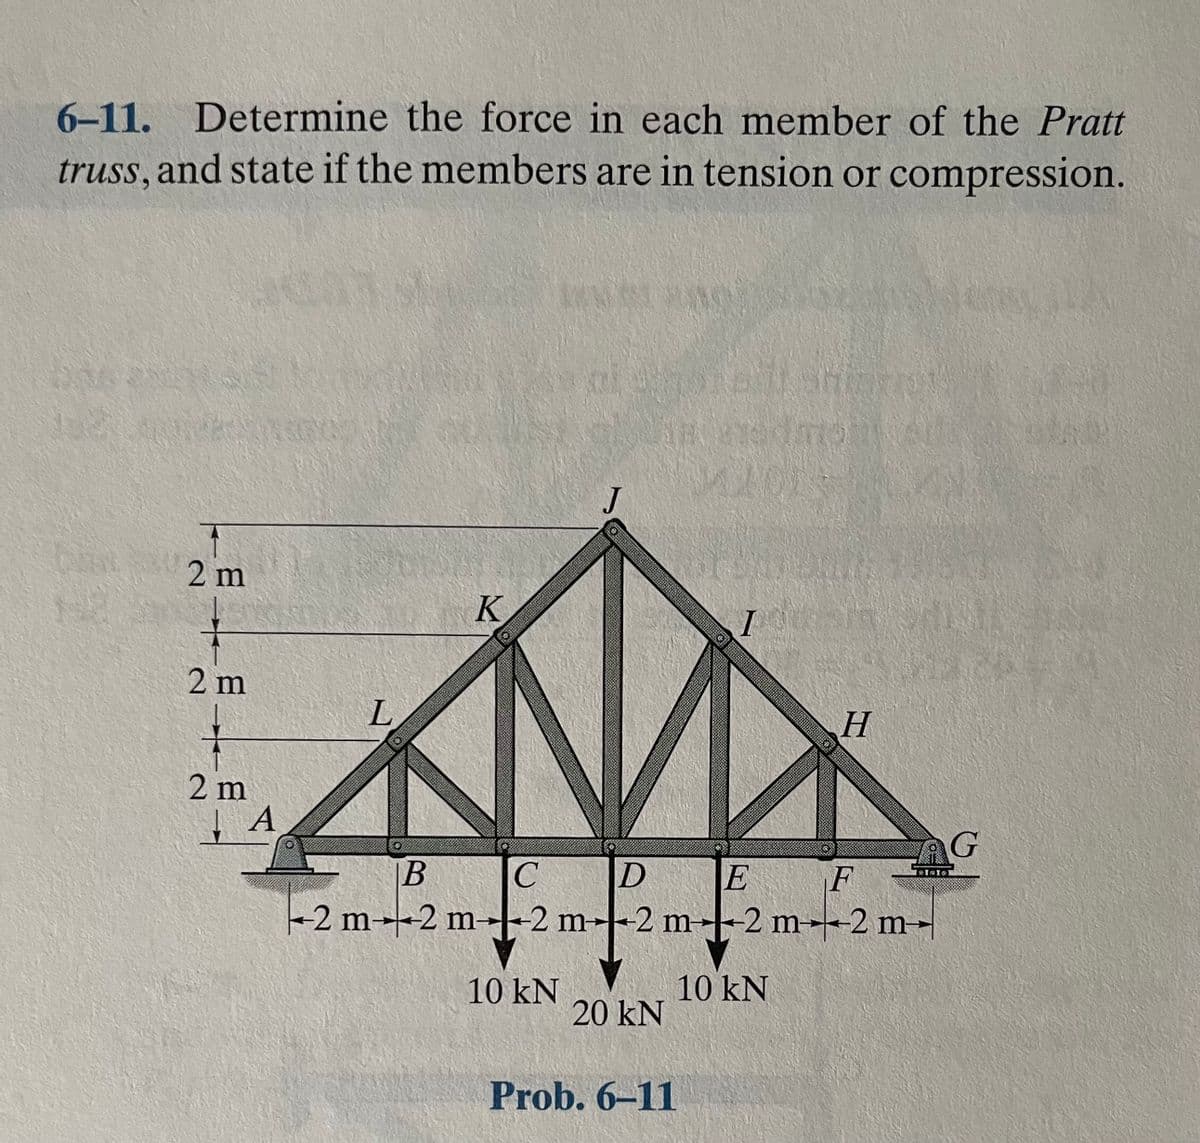 6-11. Determine the force in each member of the Pratt
truss, and state if the members are in tension or compression.
J
2 m
2 m
L
H
2 m
C
E
F
-2 m--2 m--2 m--2 m---2 m--2 m-
10 kN
10 kN
20 kN
Prob. 6-11
